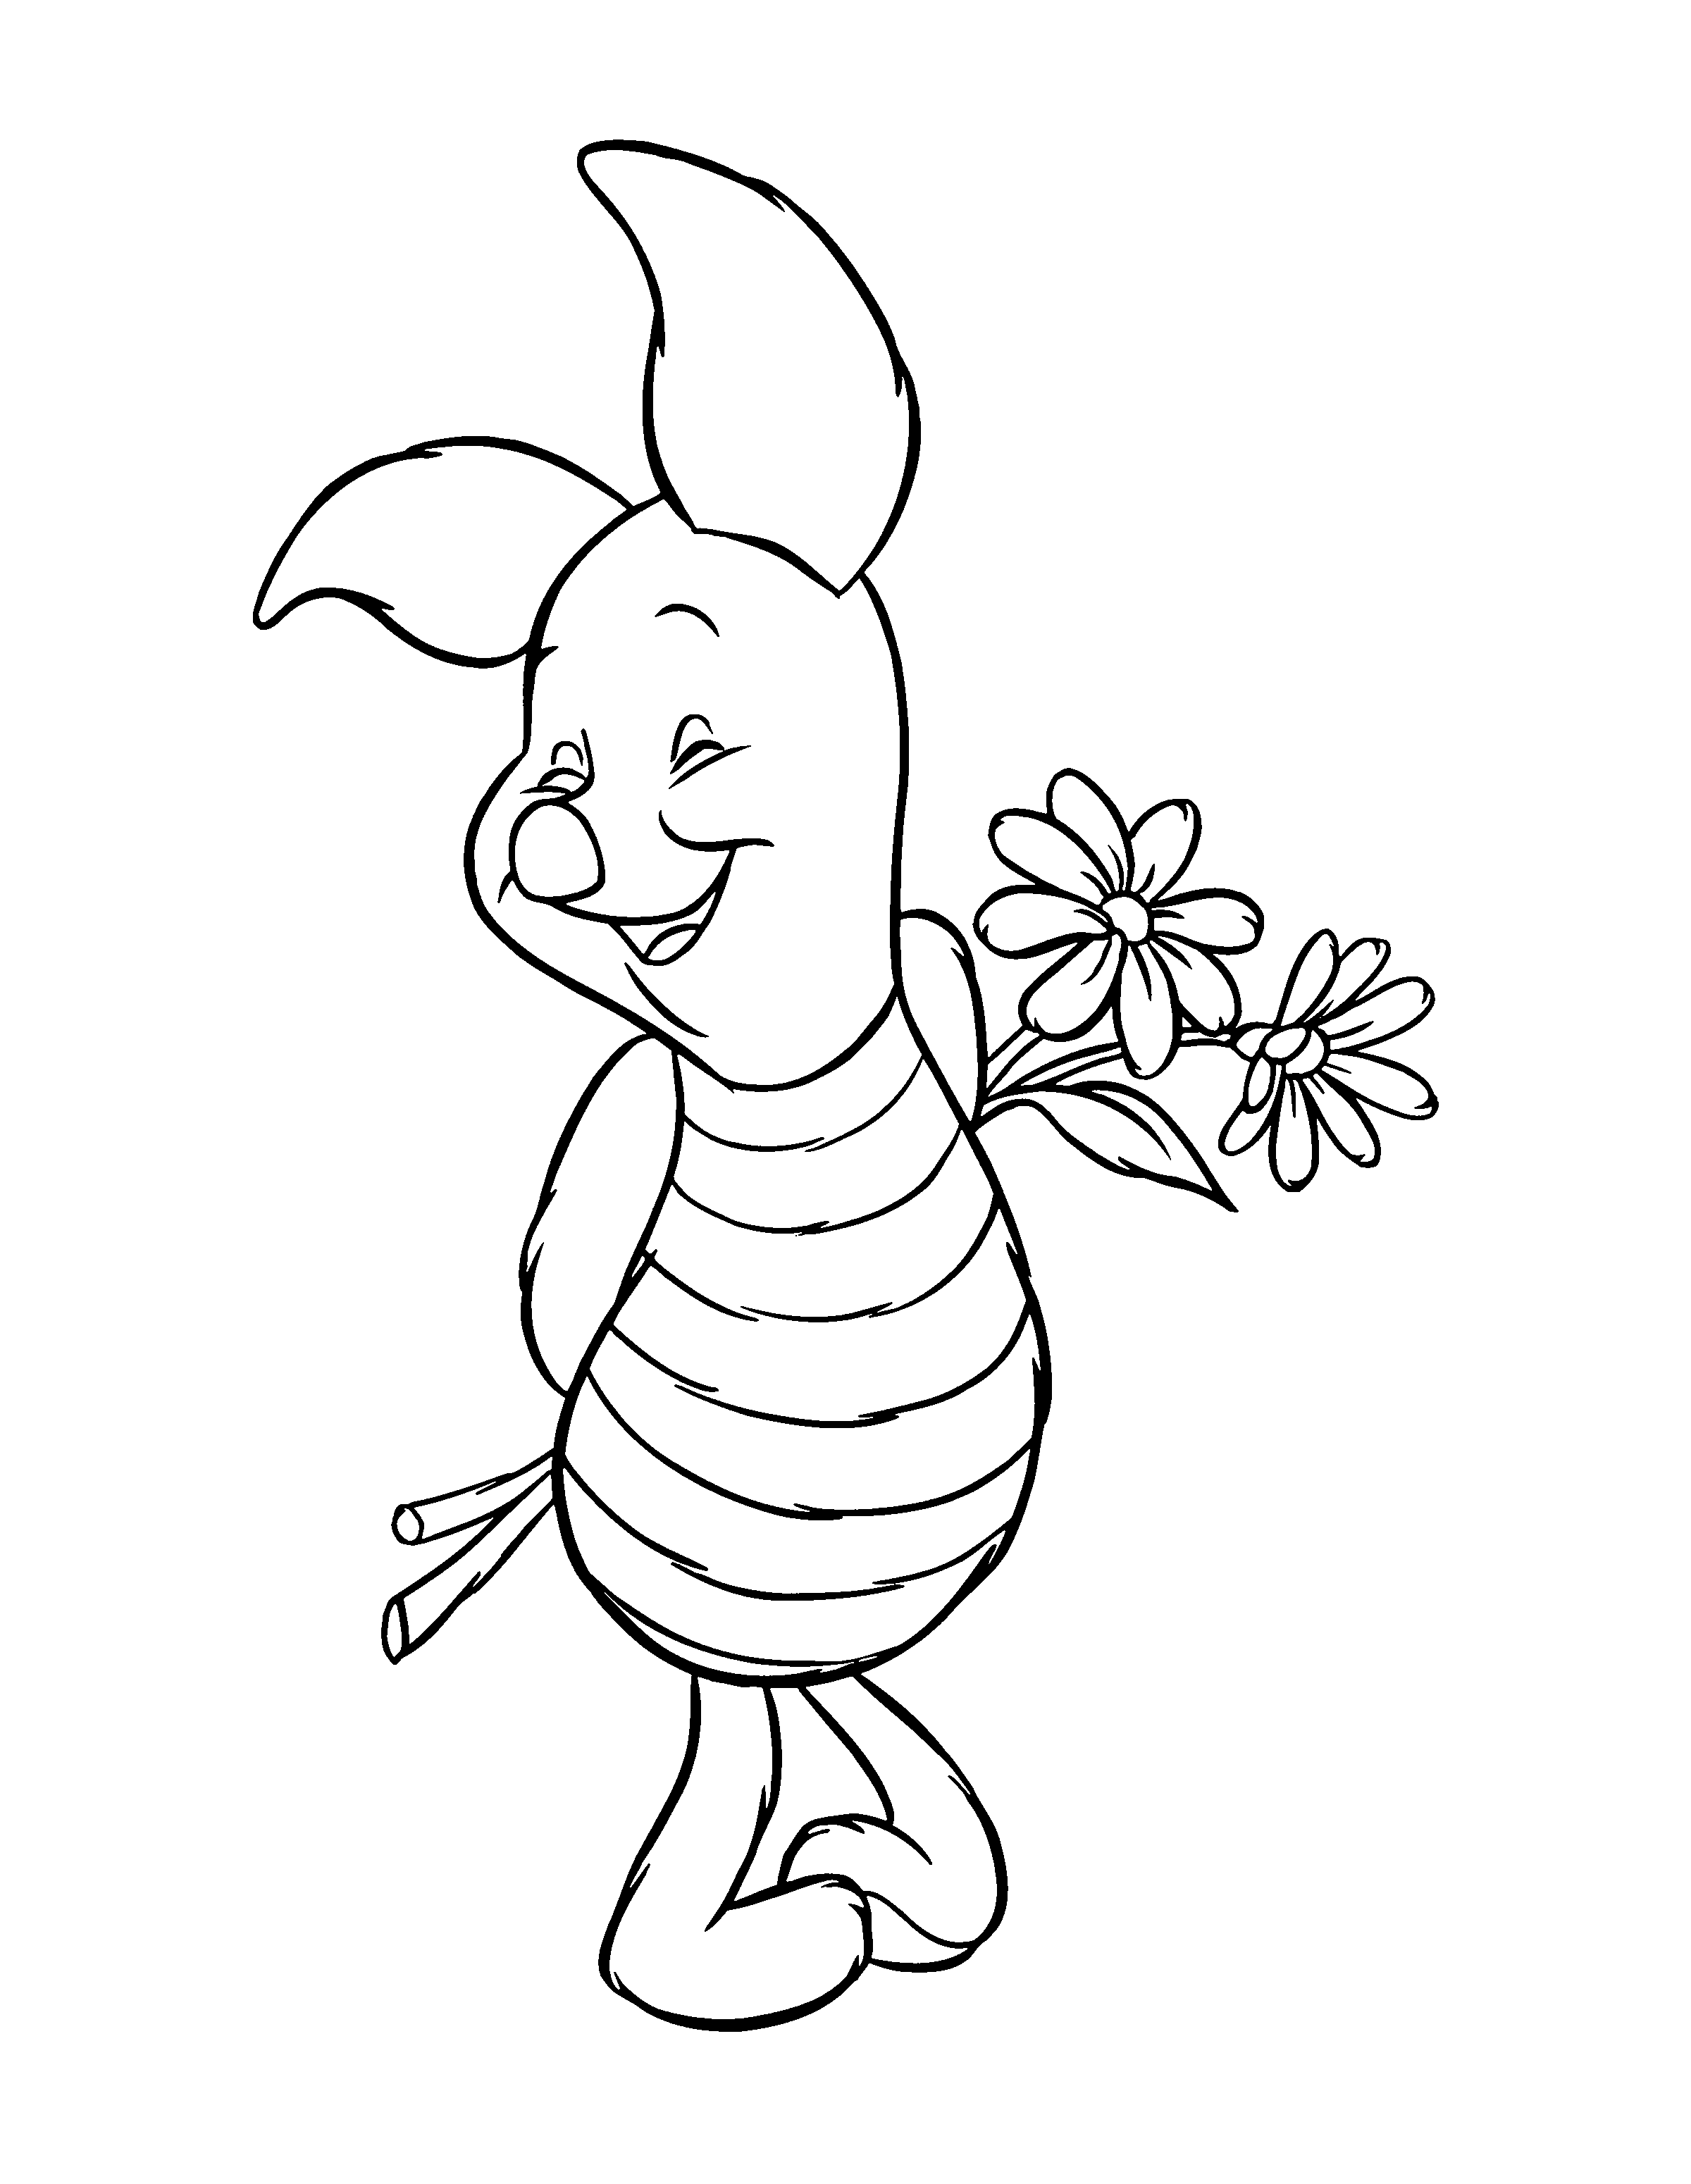 animated-coloring-pages-winnie-the-pooh-image-0065